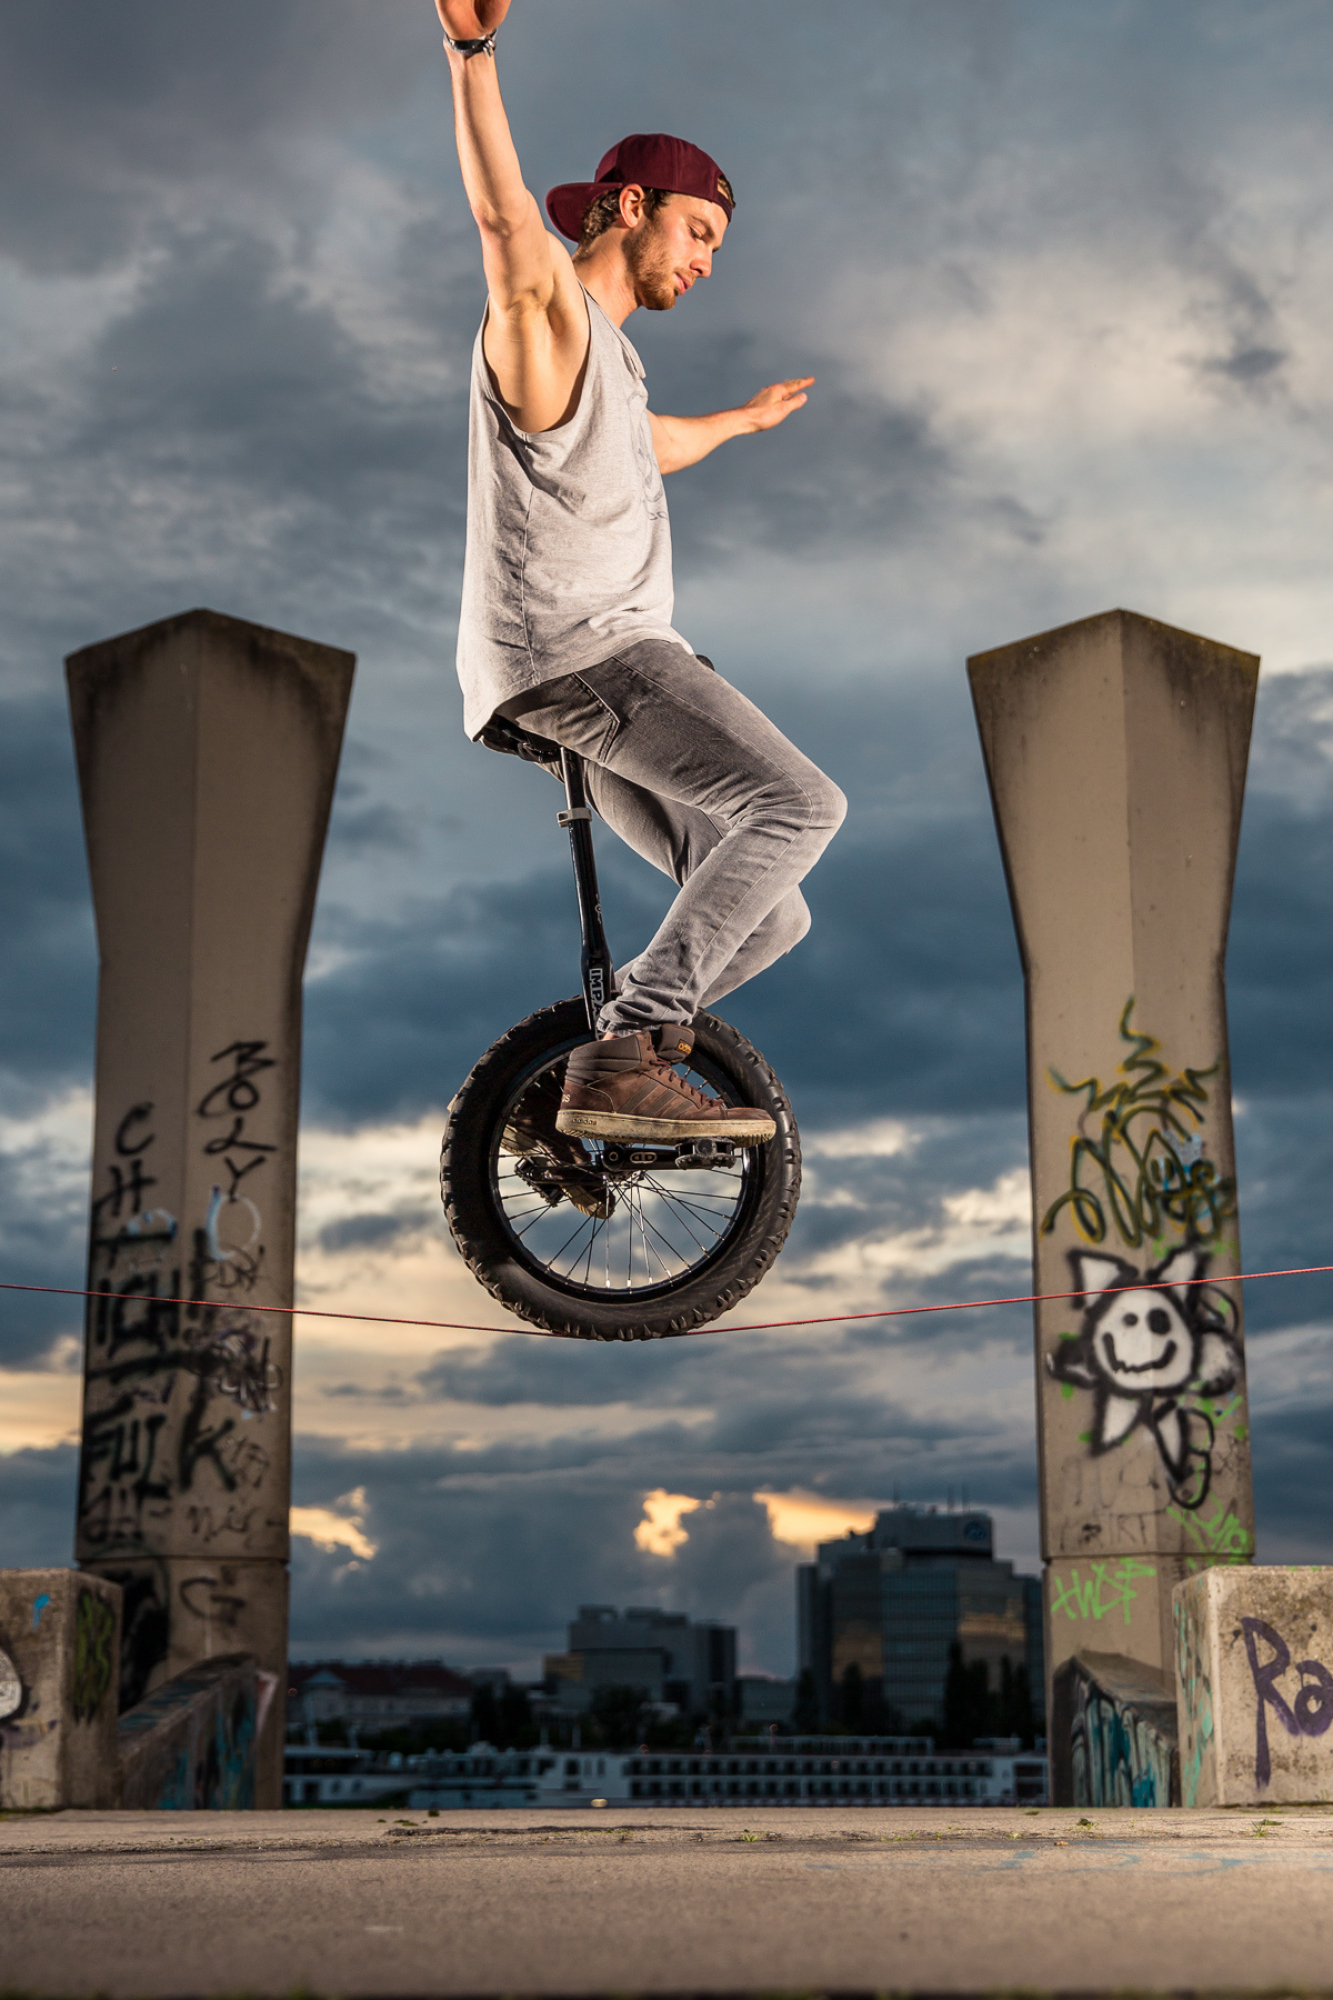 HD wallpaper, Unicycles, Samsung Hd Unicycle Background, 1340X2000 Hd Phone, Gravity Pushback, Wahlhuetter, Unicycle Sports